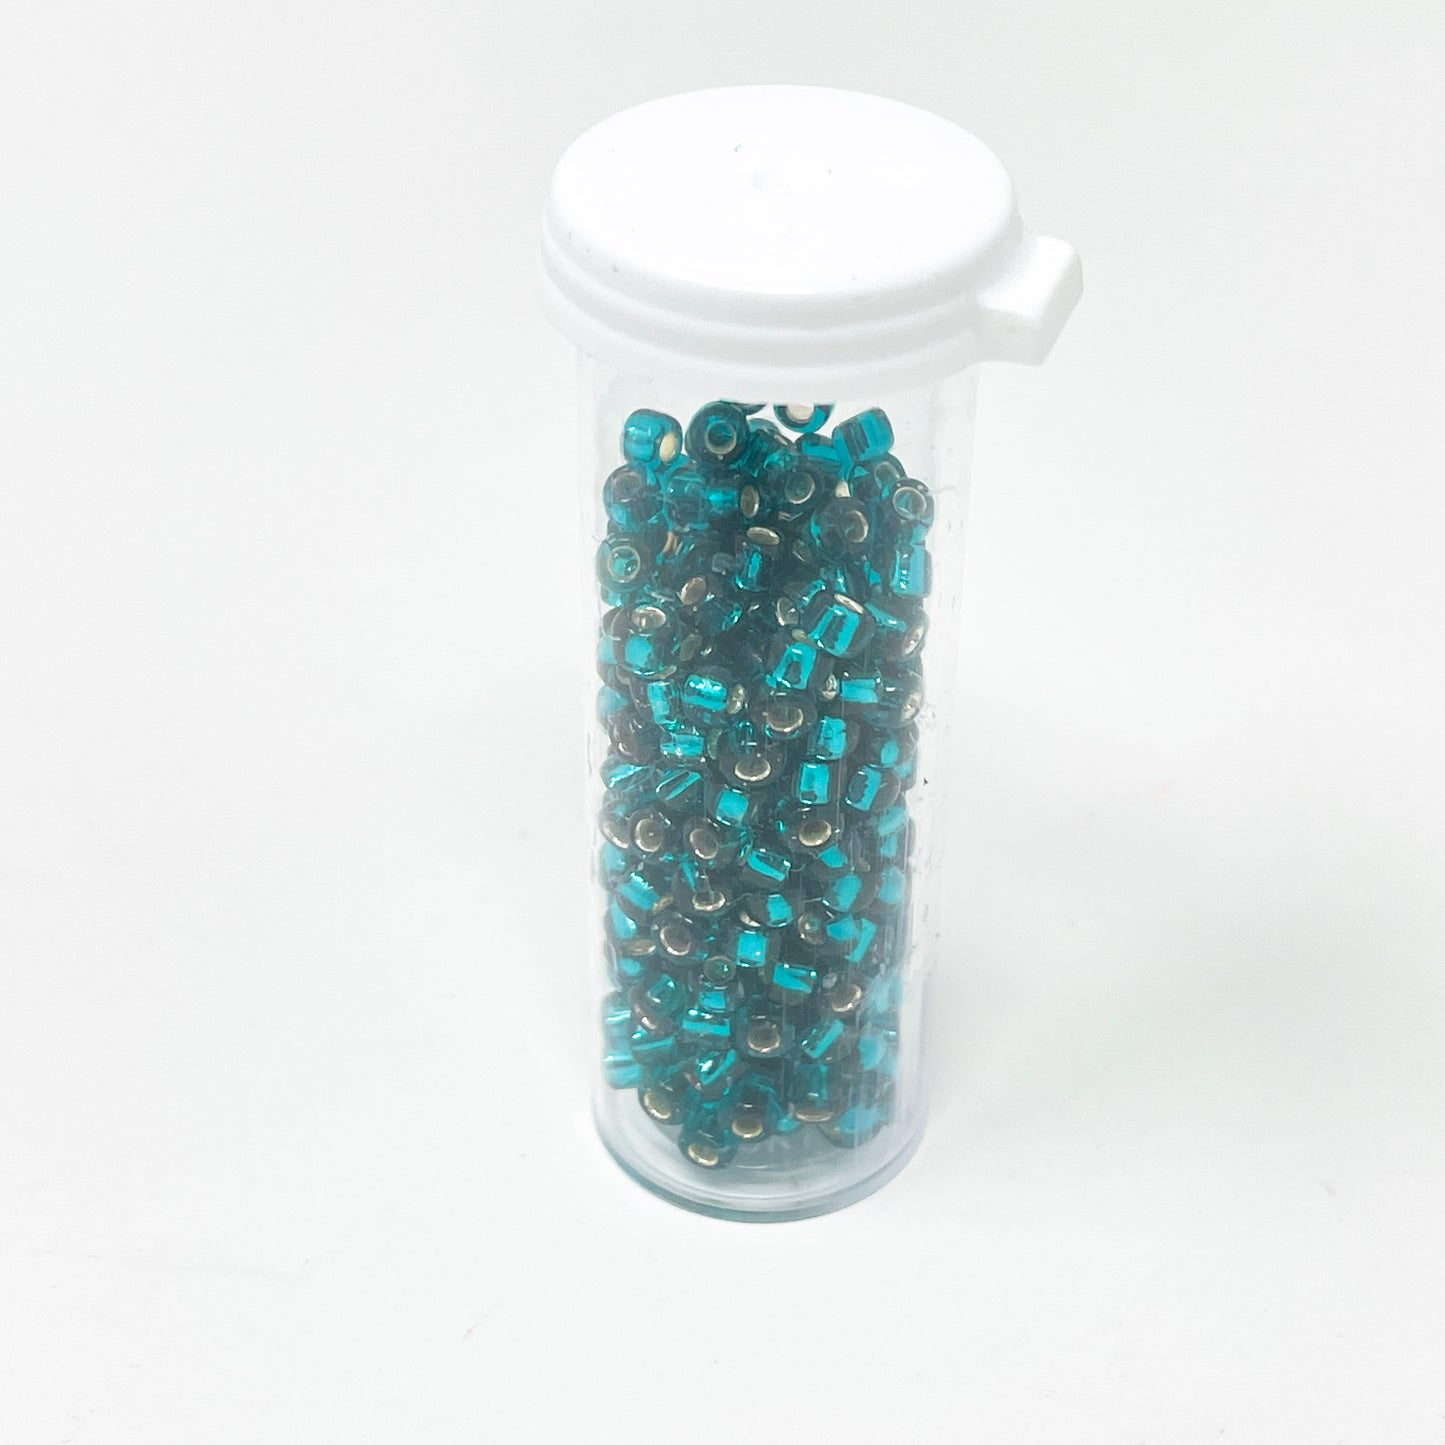 Mirrored Seed Beads - Four Colors